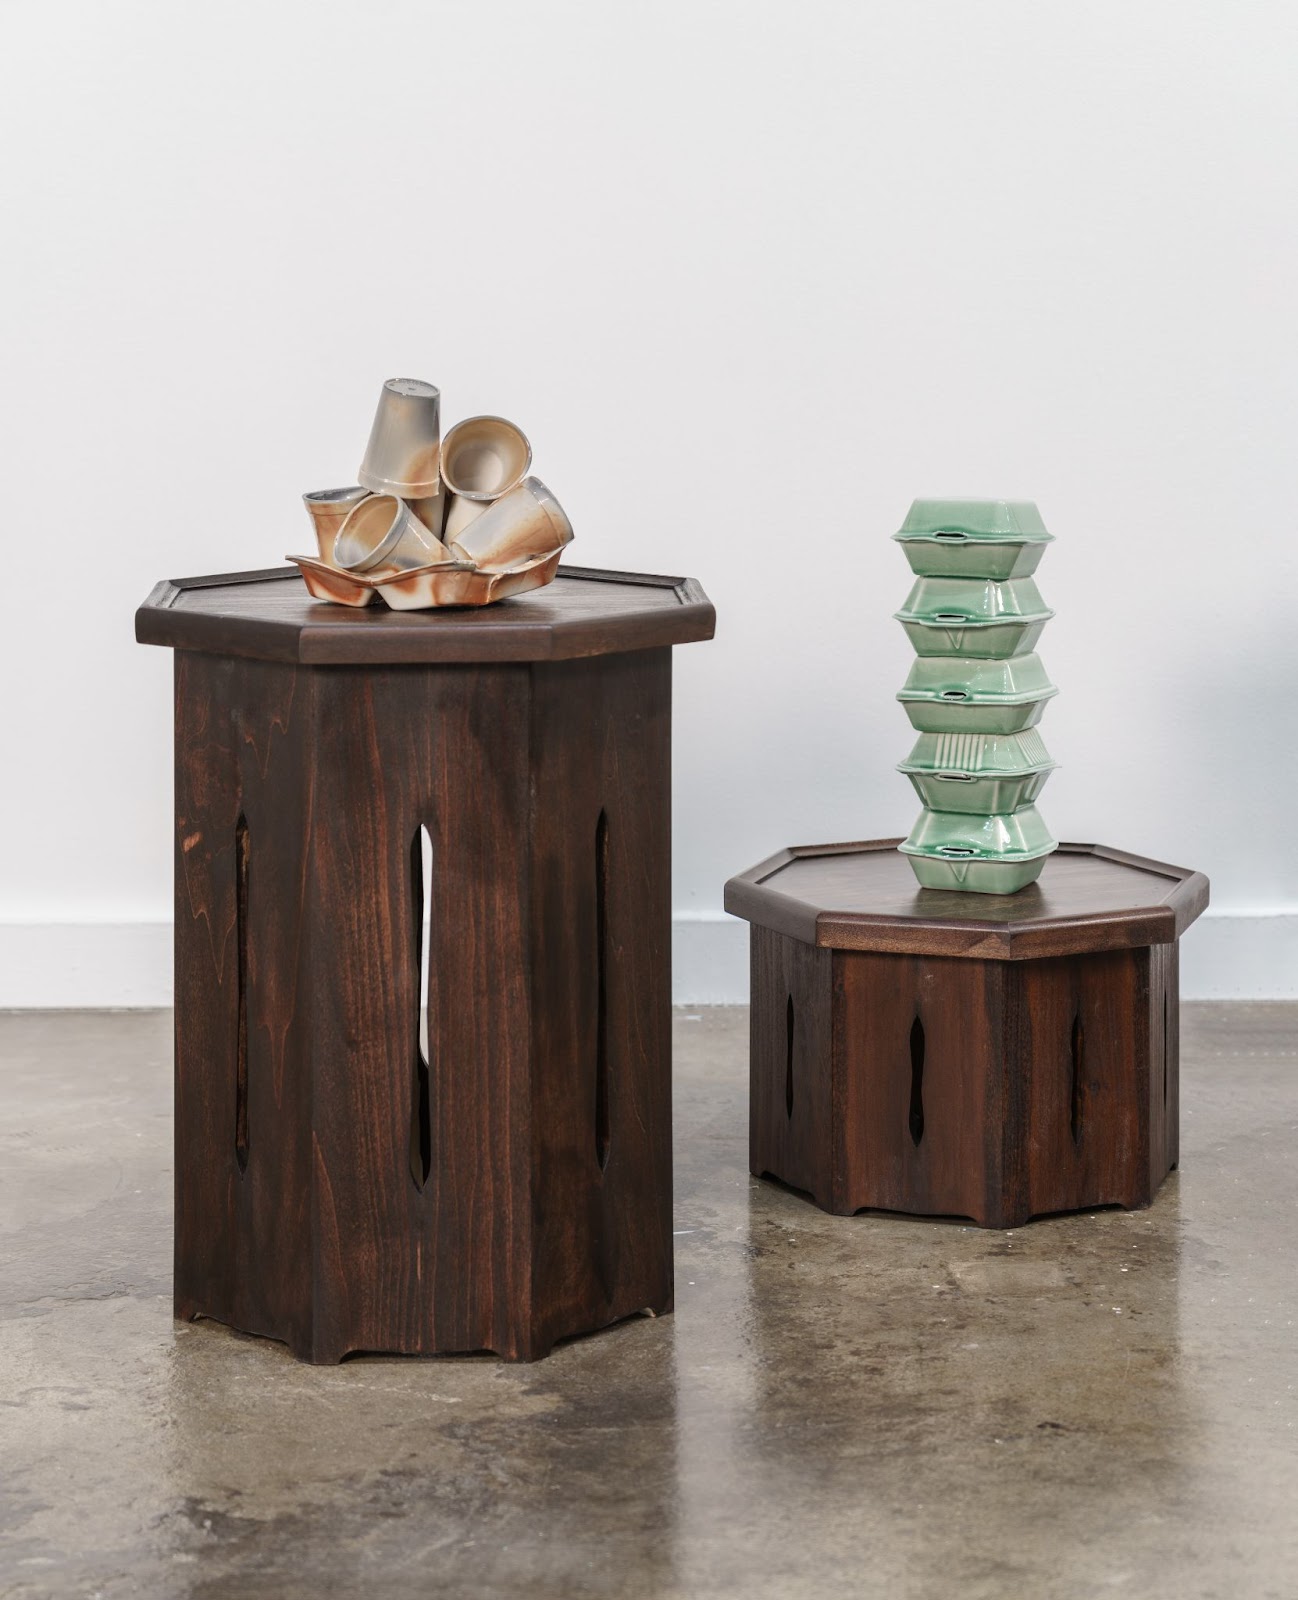 Image: Installation view, Generally Meant to be Discarded. Two wooden soban with porcelain casts of takeout containers and styrofoam cups. Image courtesy of the artist, photo by E.G. Schempf.